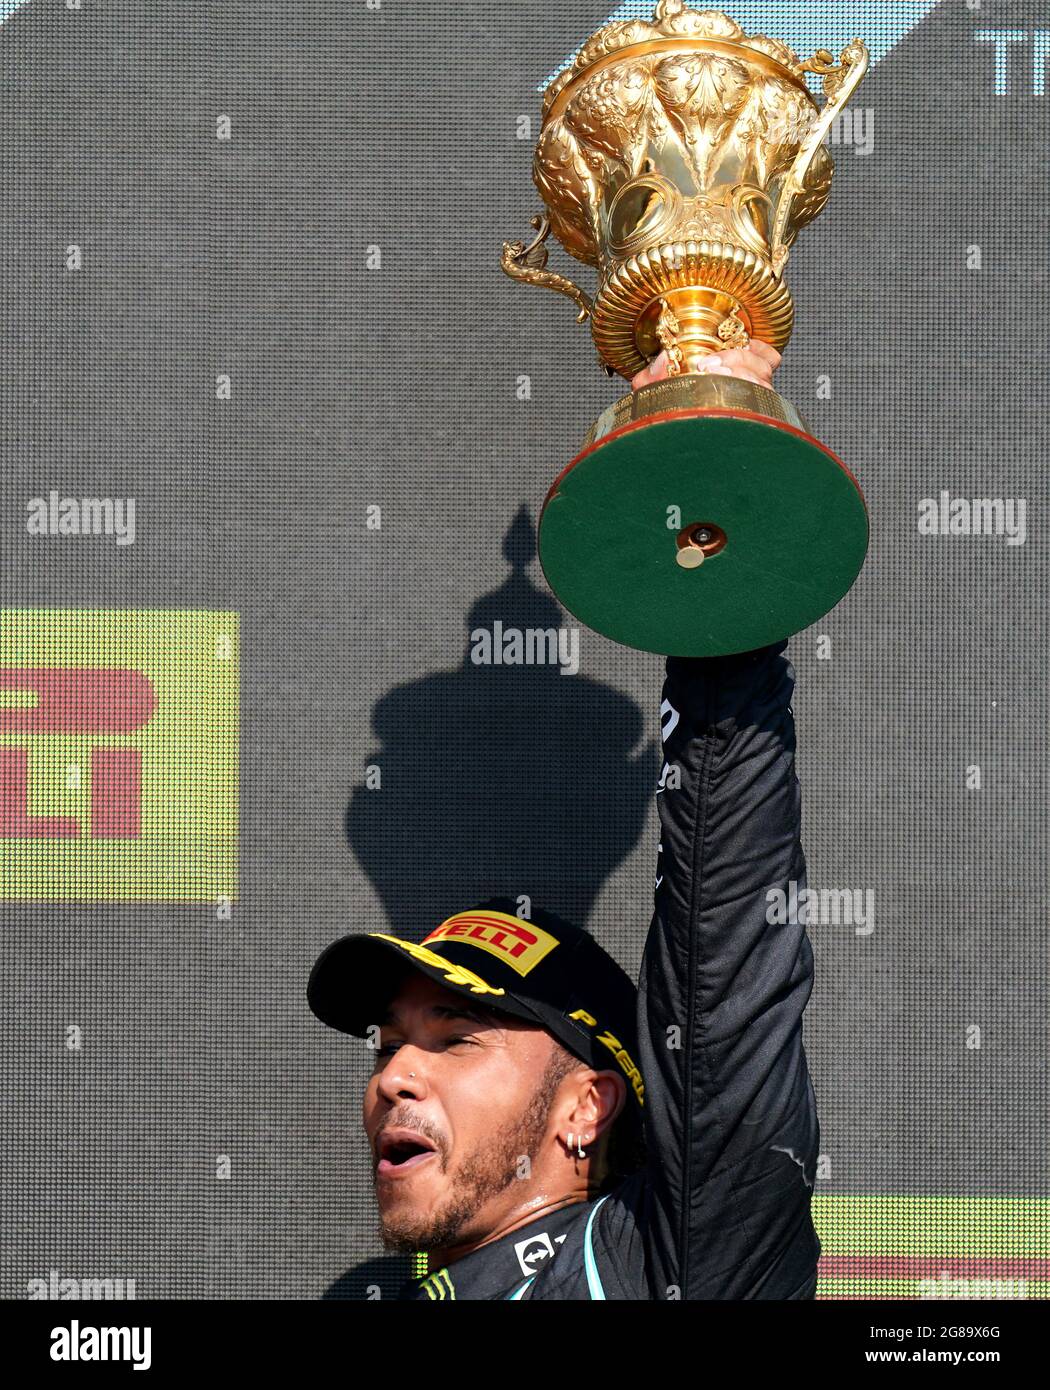 Lewis Hamilton hoping for a pot of gold at Silverstone - Eurosport